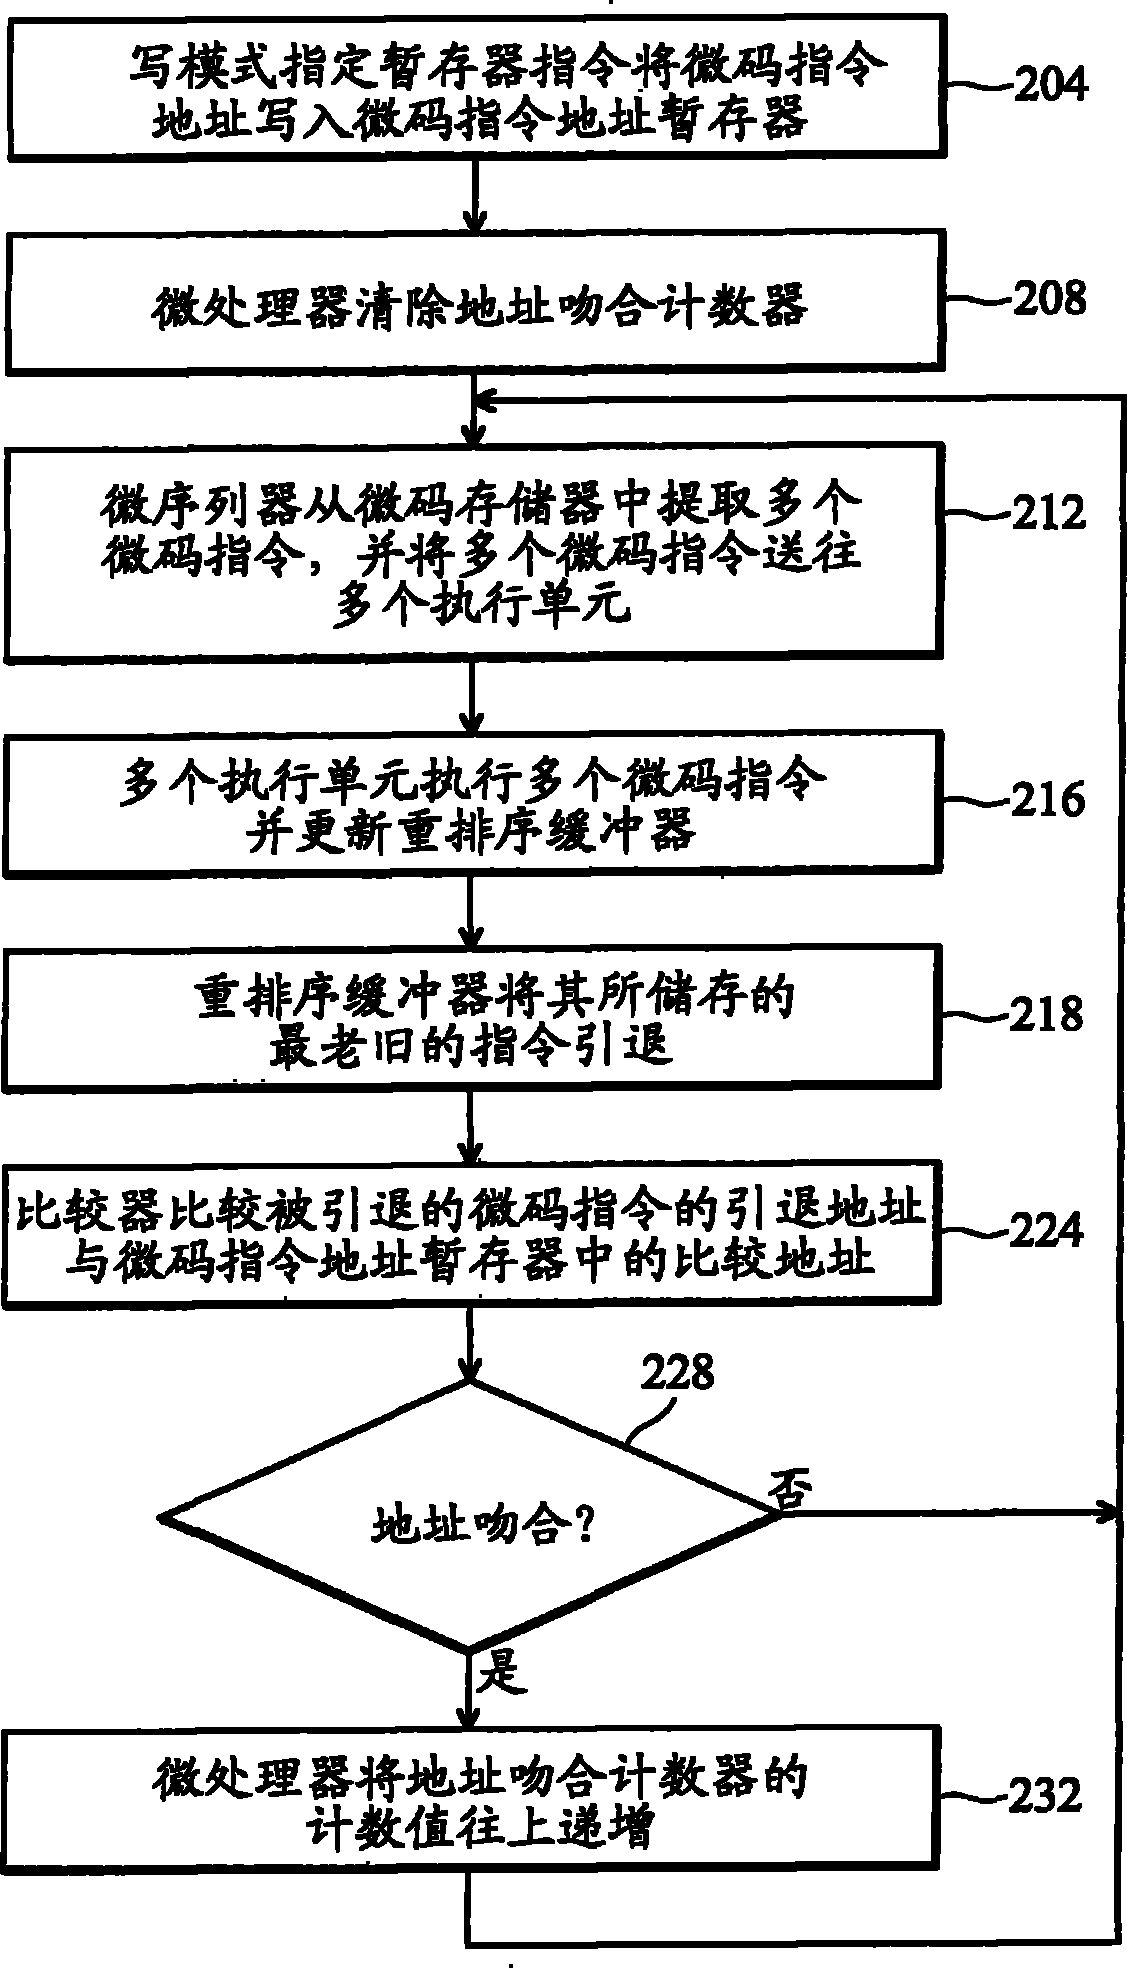 Performance counter for microcode instruction execution and counting method